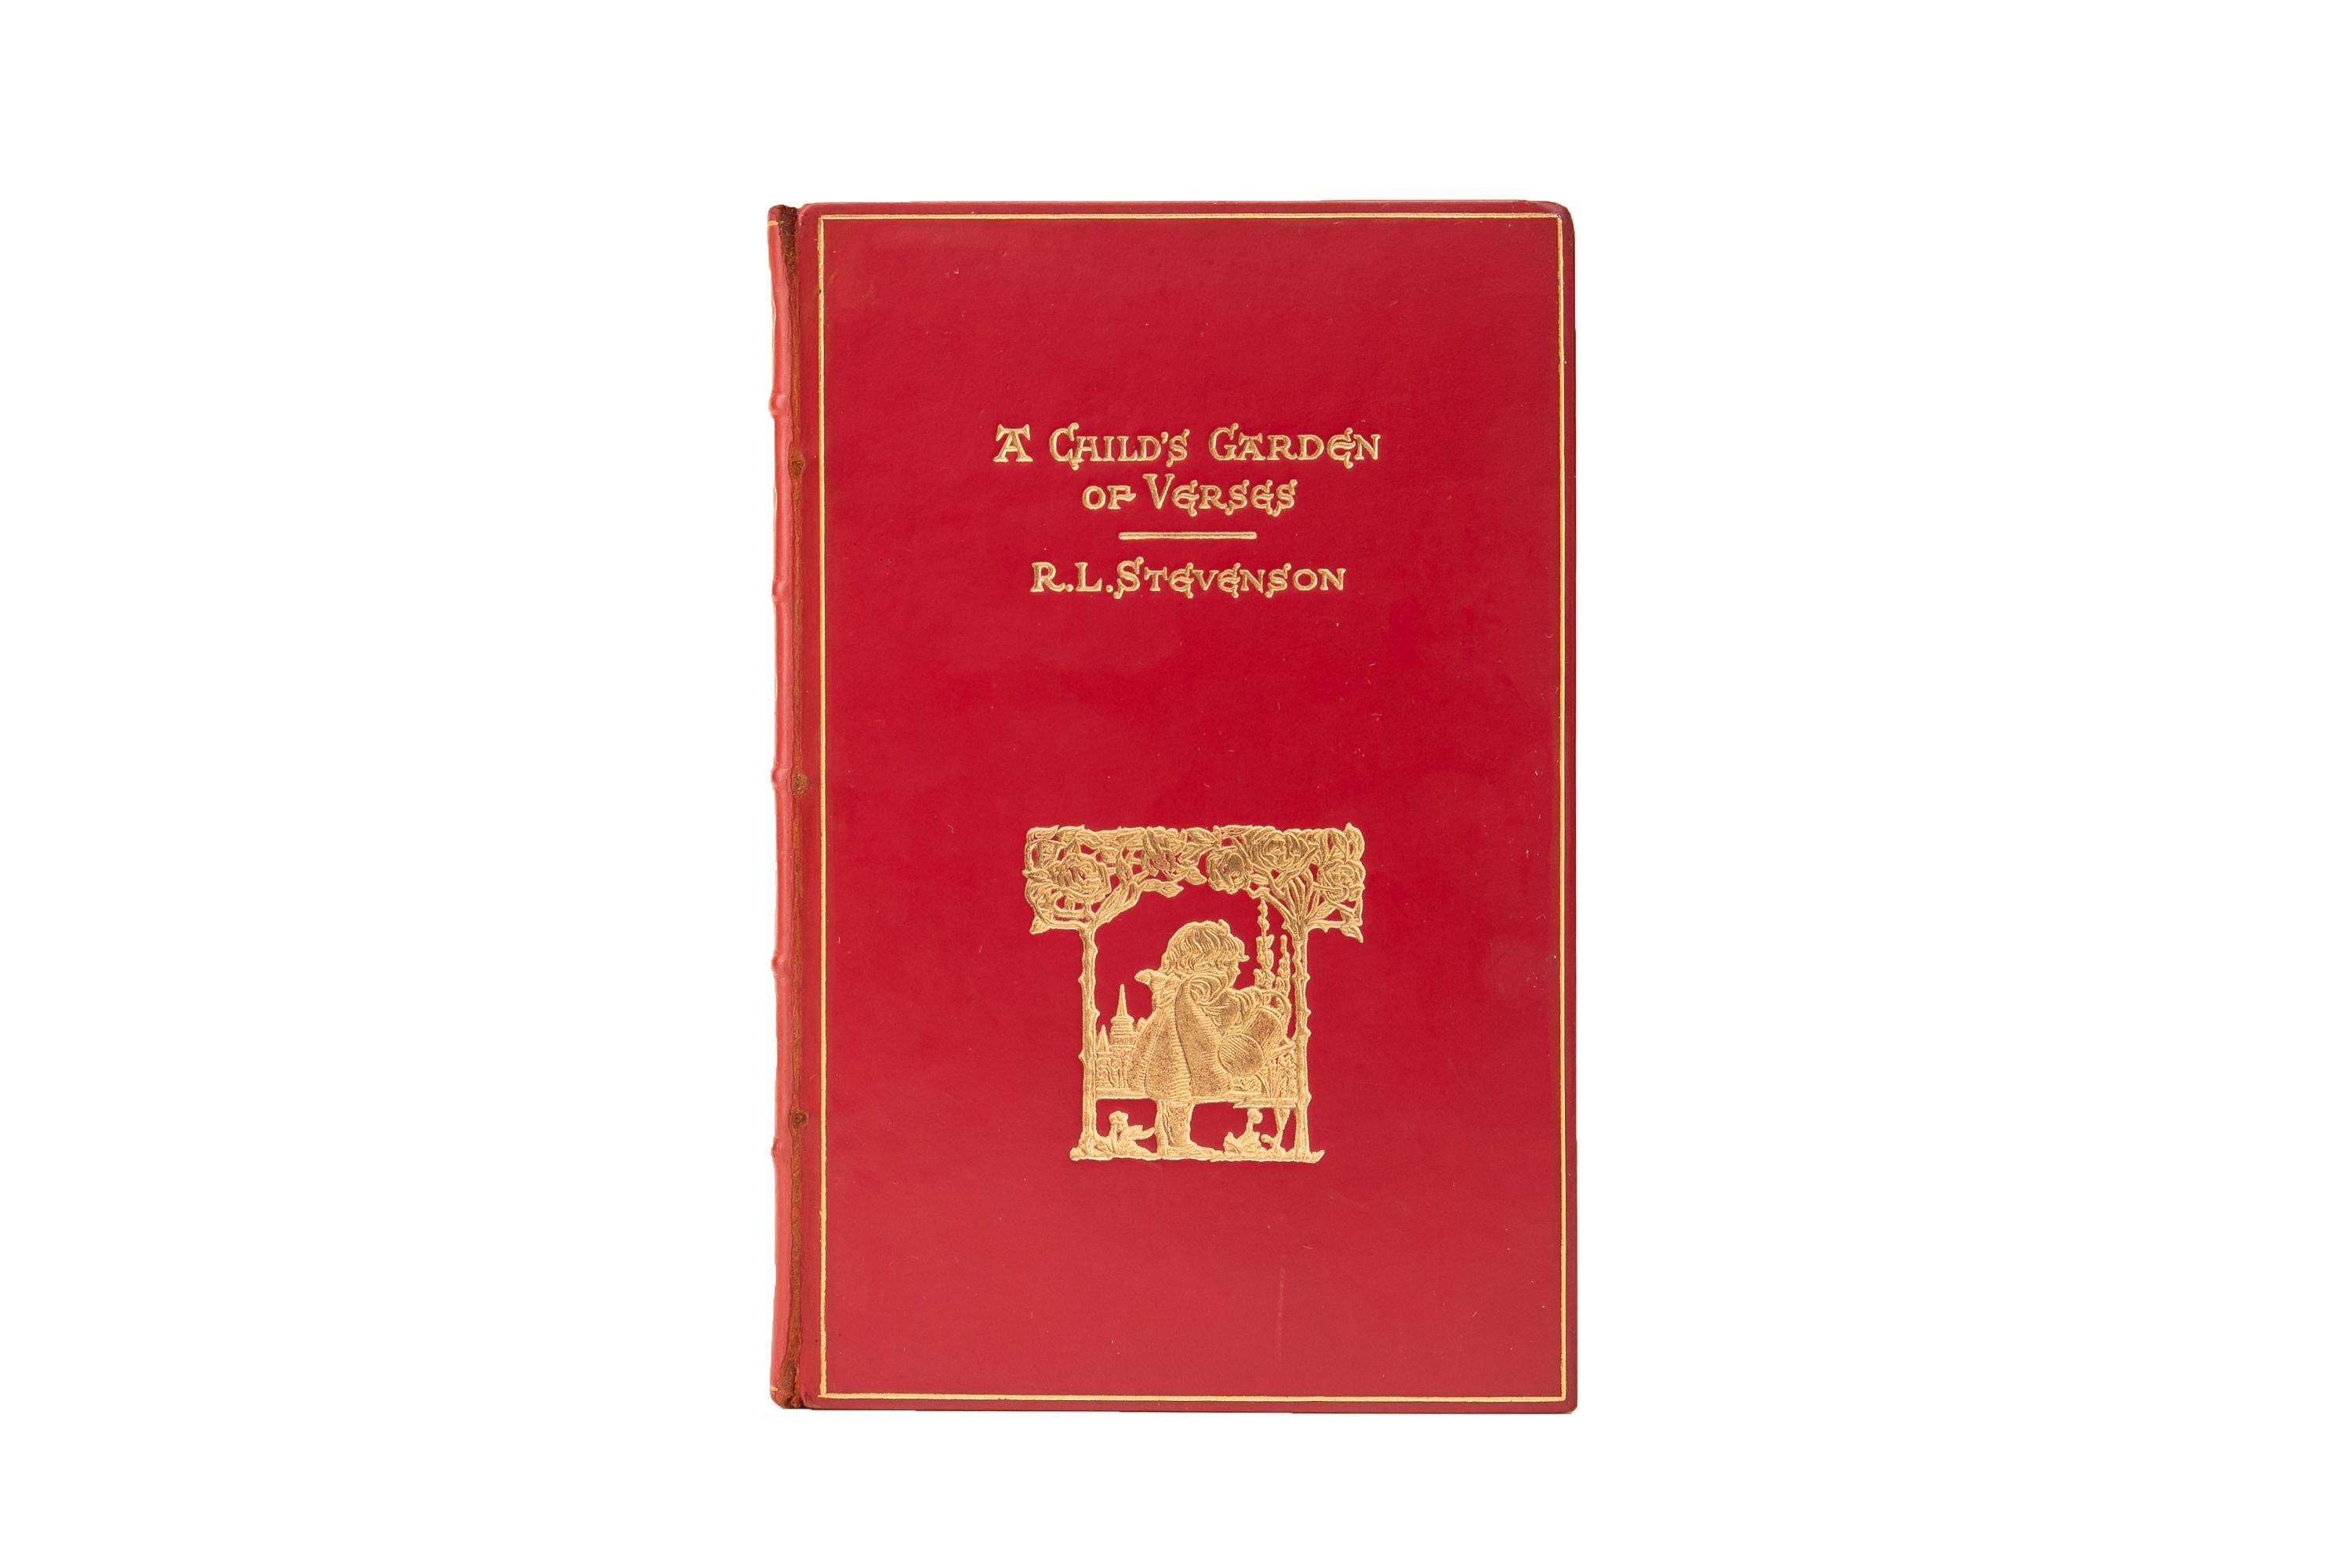 1 Volume. Robert Louis Stevenson, A Child's Garden of Verses. Bound in full red calf with the cover displaying an ornate gilt-tooled scene and title. Raised band spine with gilt-tooled floral detailing. All edges are gilt with gilt-tooled dentelles